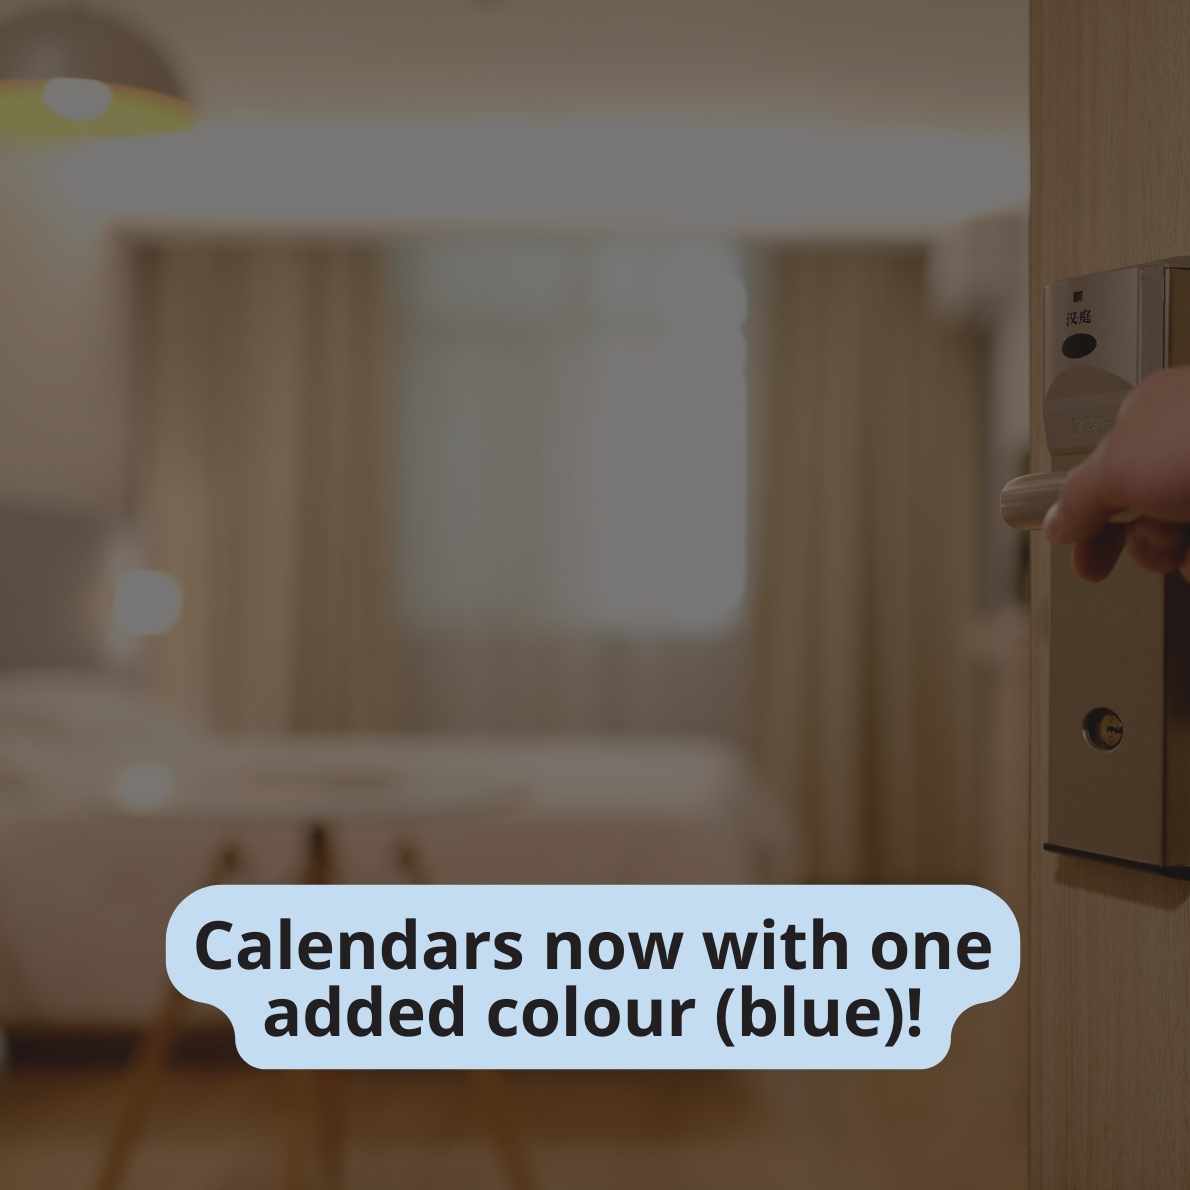 Calendar Now with one added colour with blue